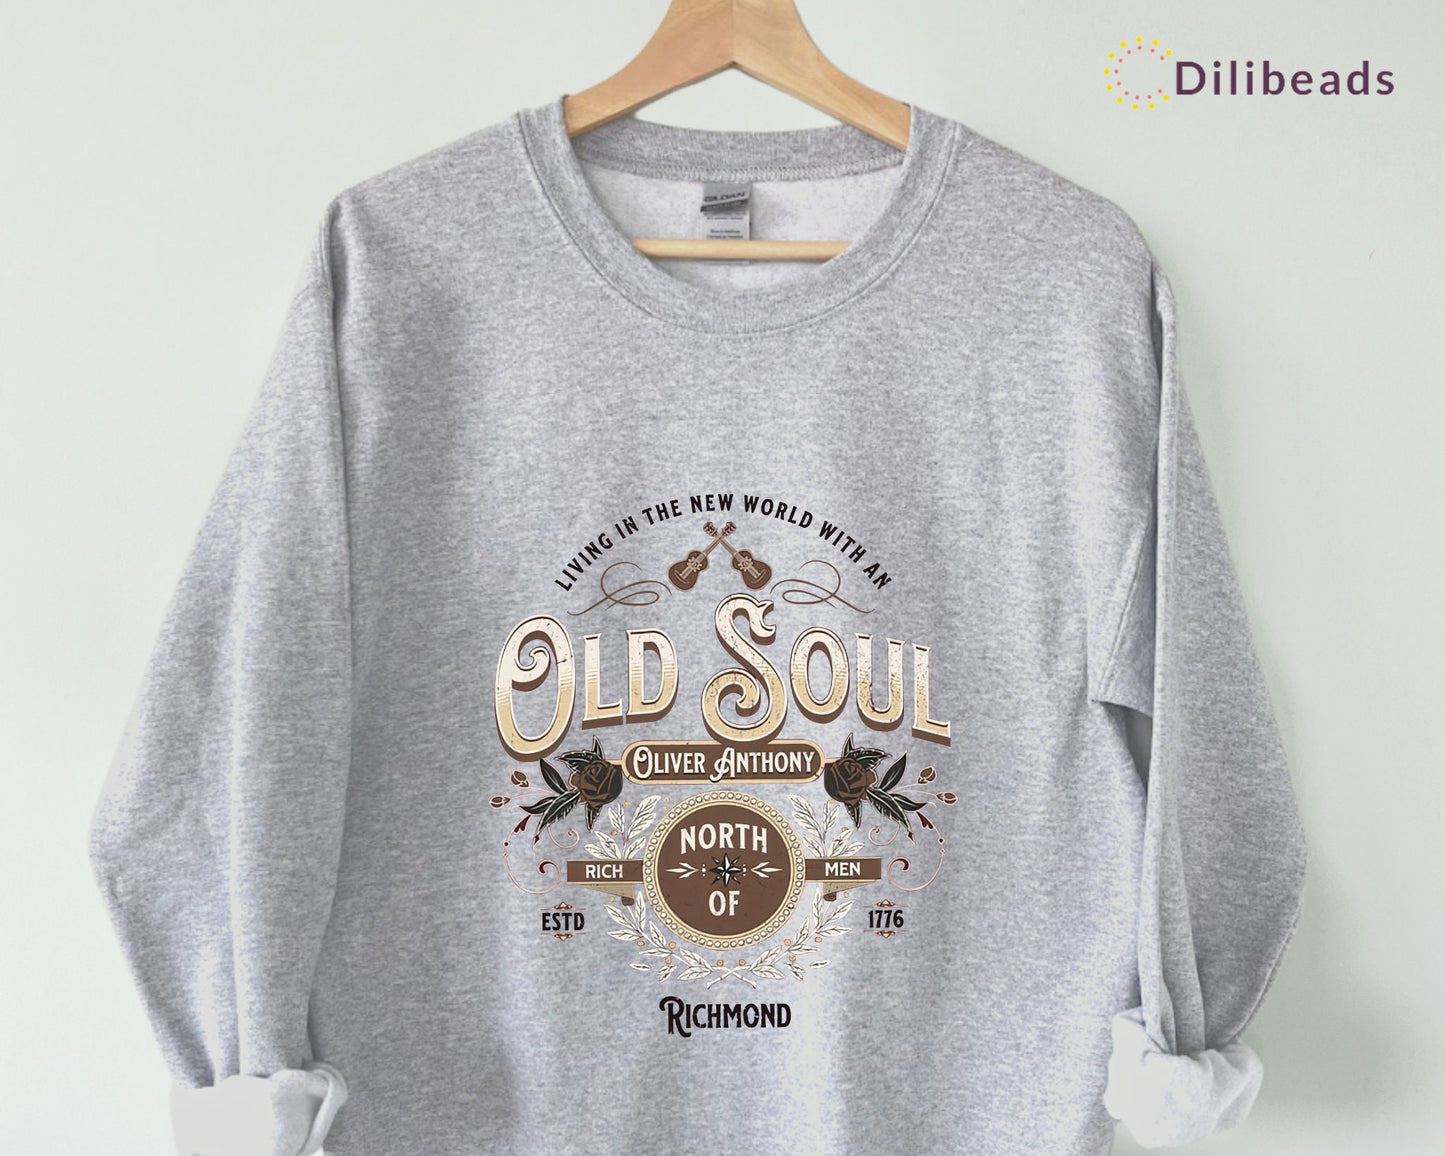 North of Richmond Old Soul Sweatshirt | New World With An Old Soul Hoodie | Rich Men North Of Richmond Sweatshirt |Oliver Anthony Song Shirt